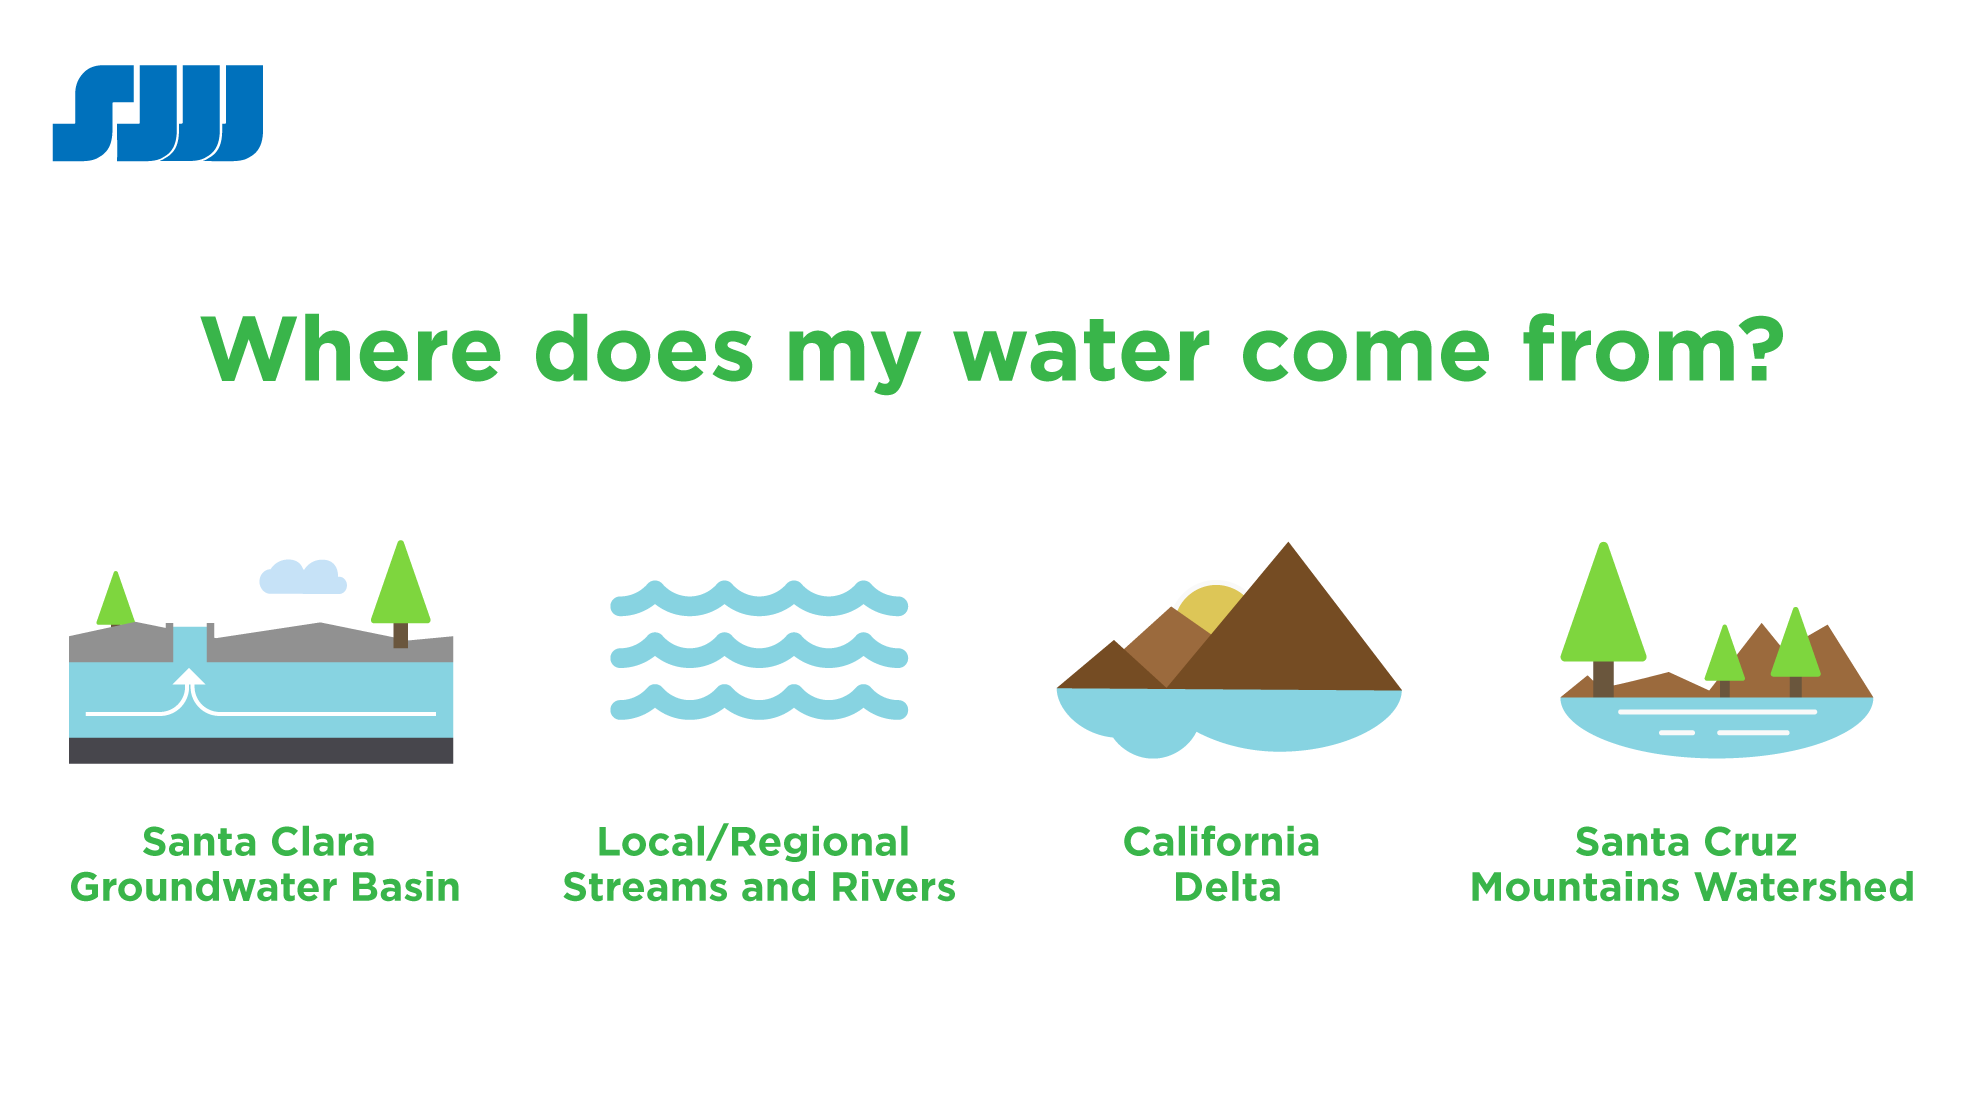 Where does my water come from graphic